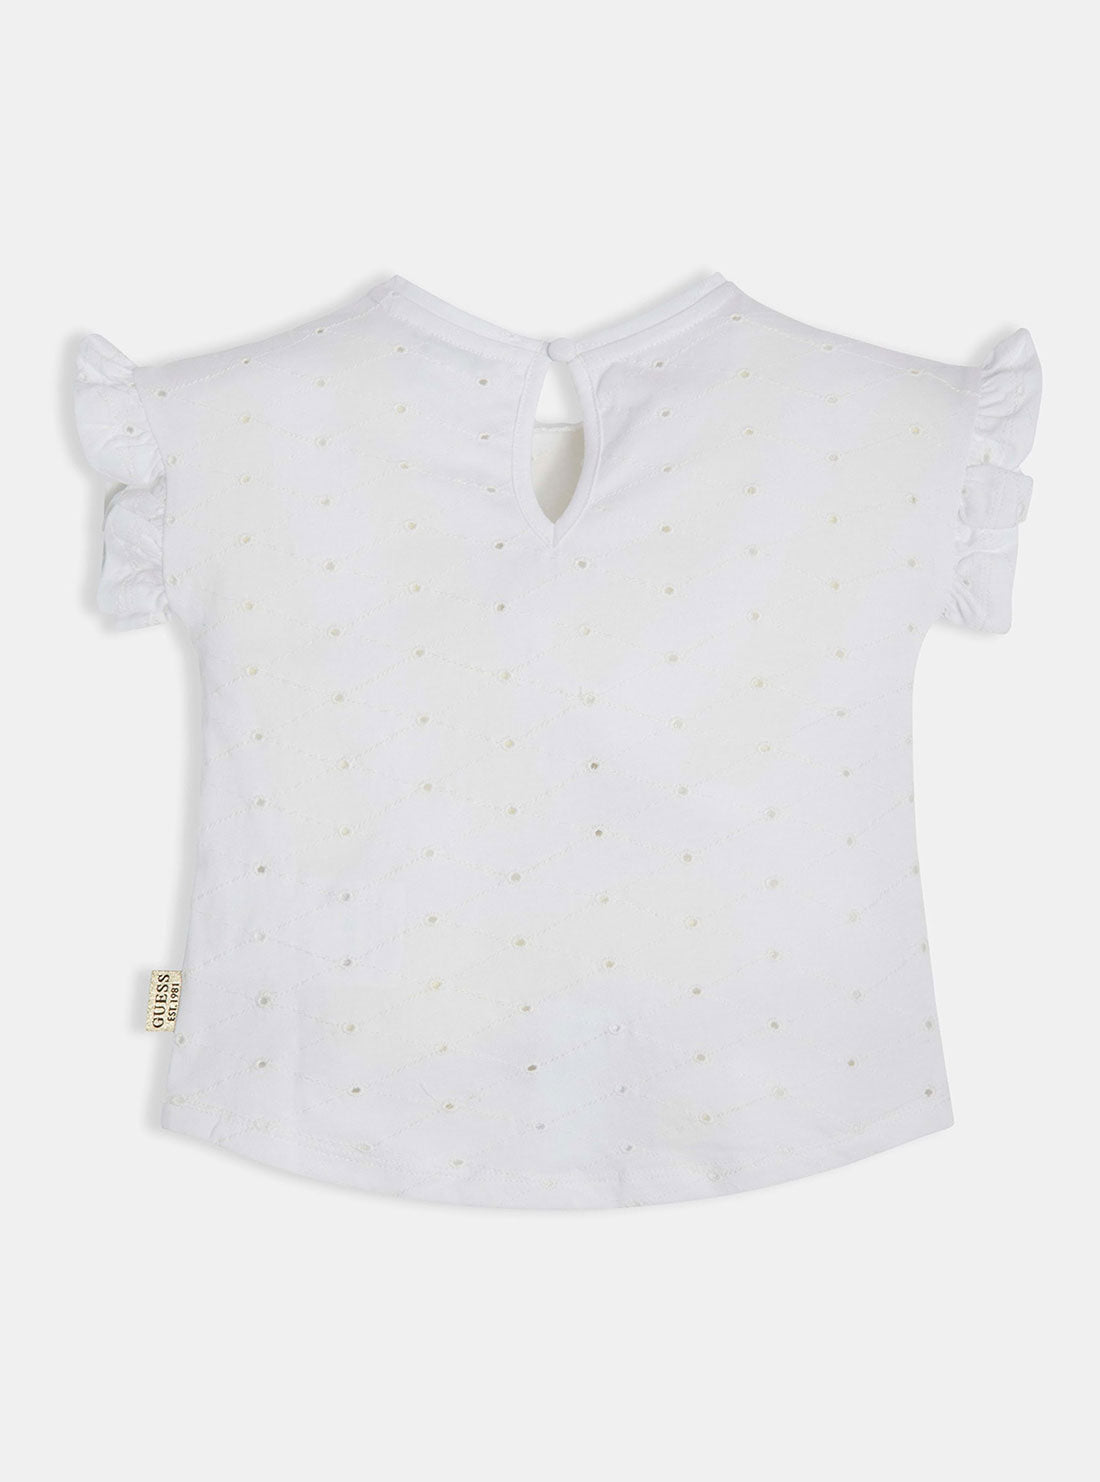 White Sangallo Embroidered Top | GUESS Kids | Back view